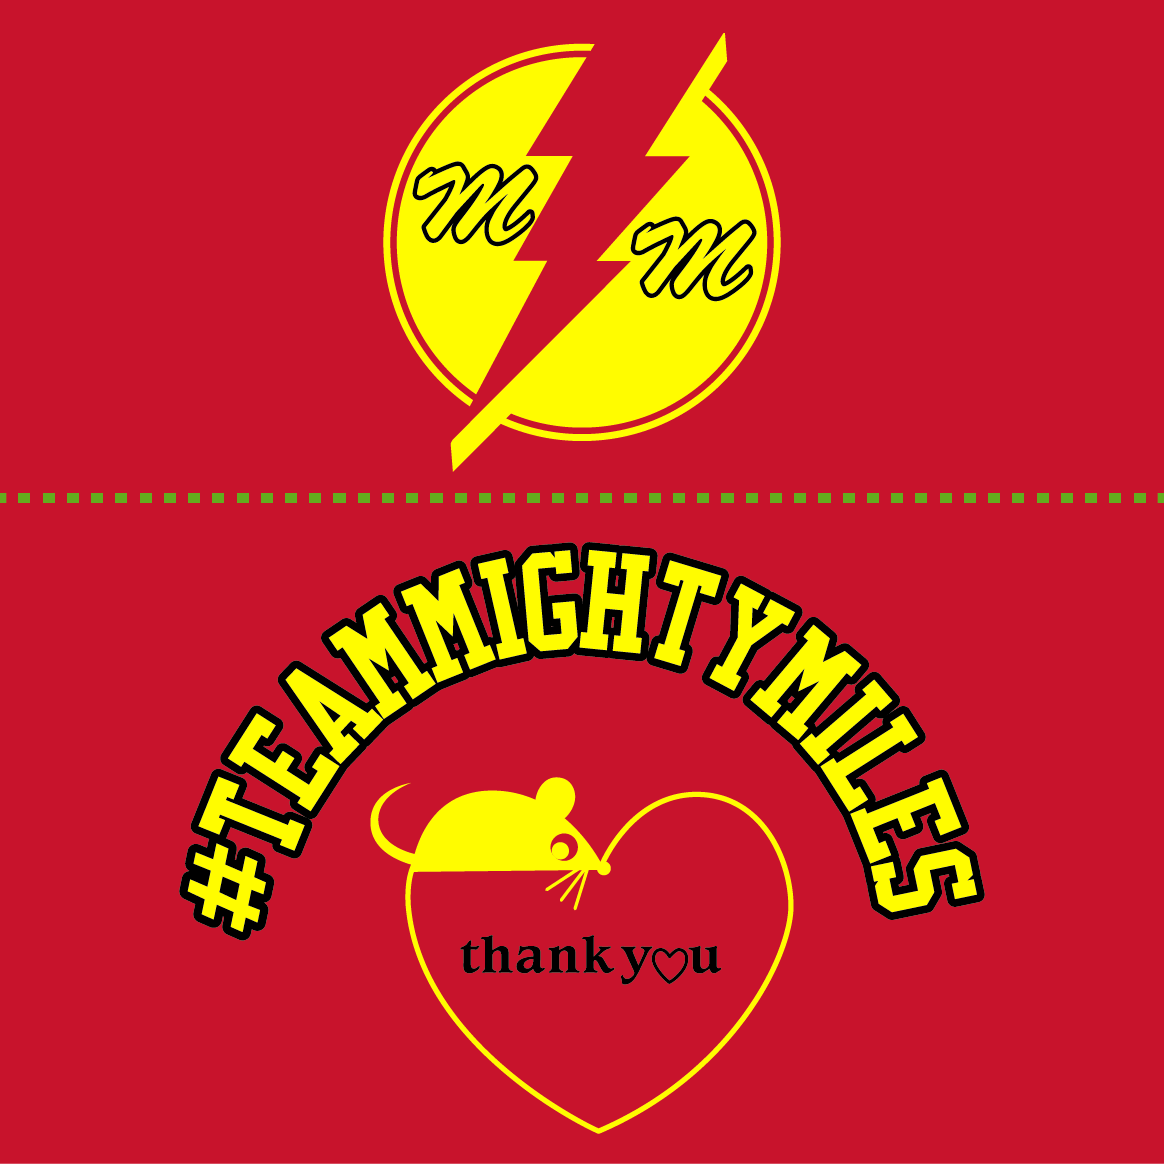 TEAM MIGHTY MILES shirt design - zoomed